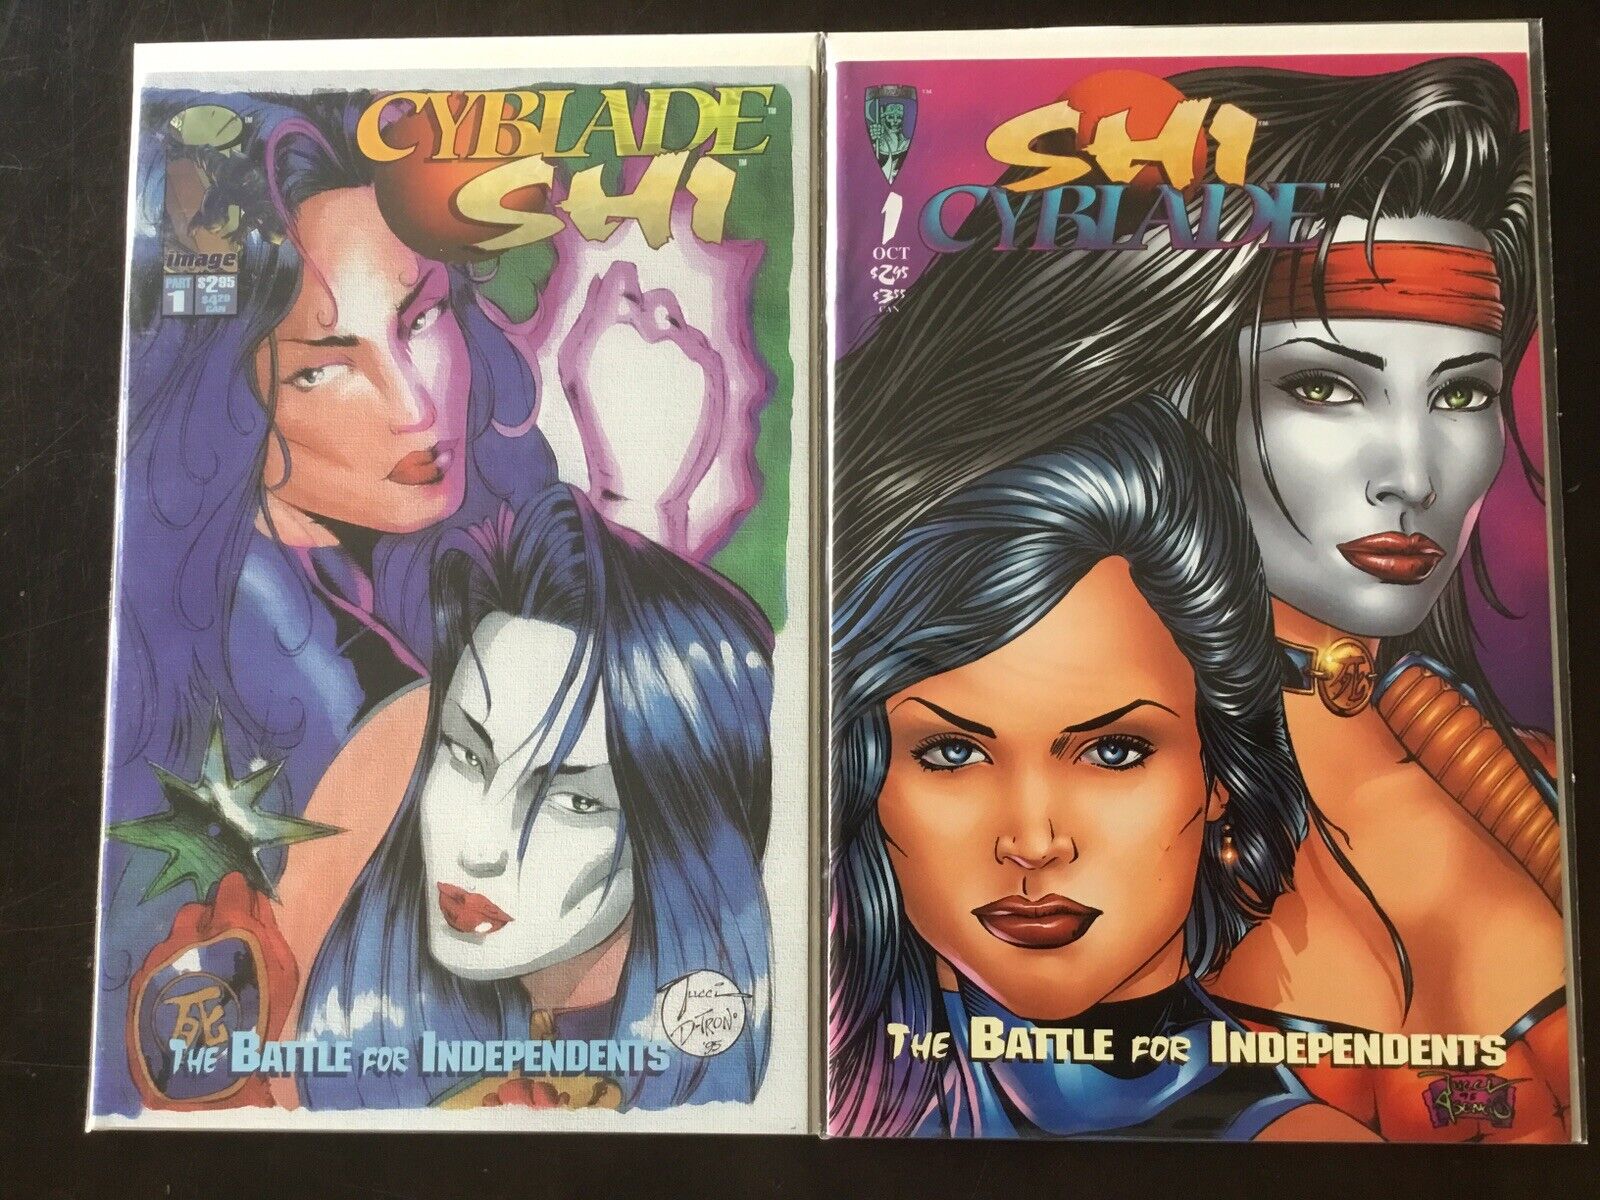 (2) Cyblade Shi Battle For Independents #1 Comic Variants Image 1995 Witchblade